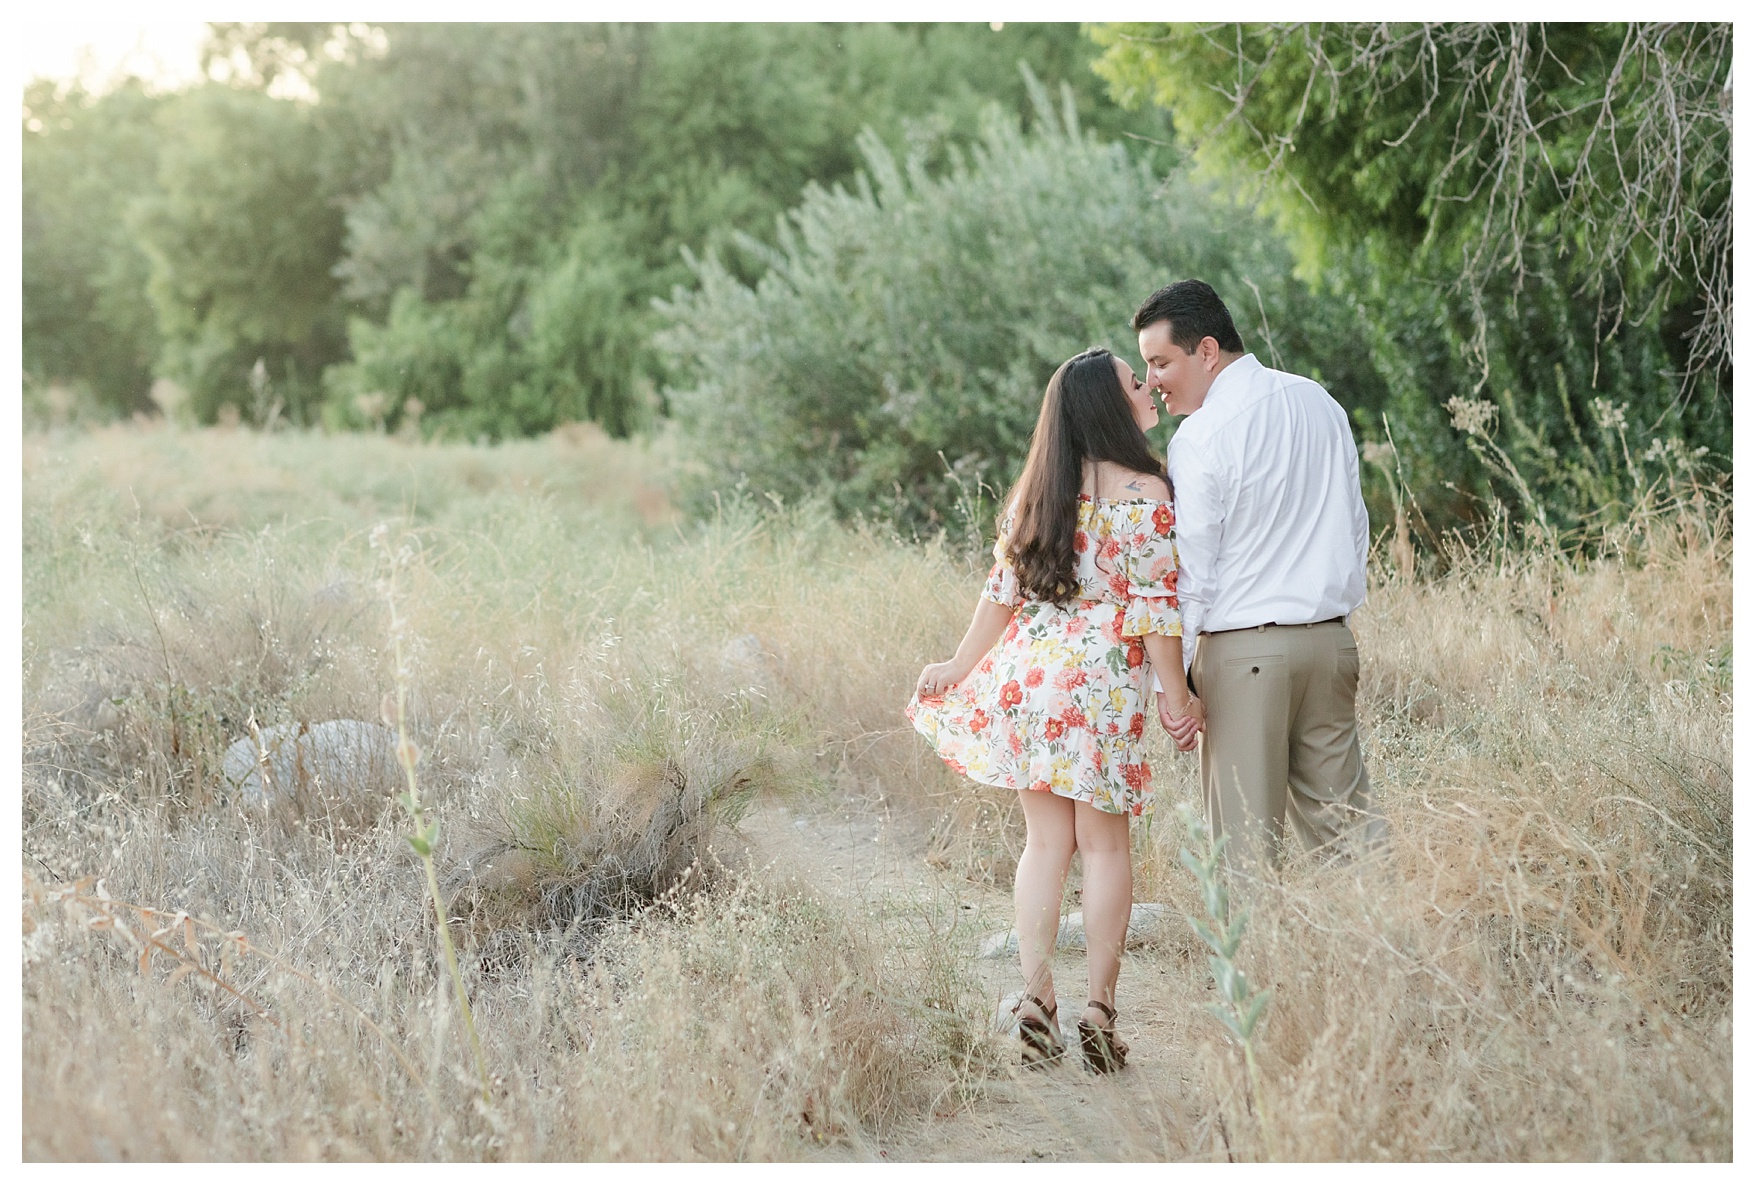 stealing a kiss during a sunset engagement session at Kern River